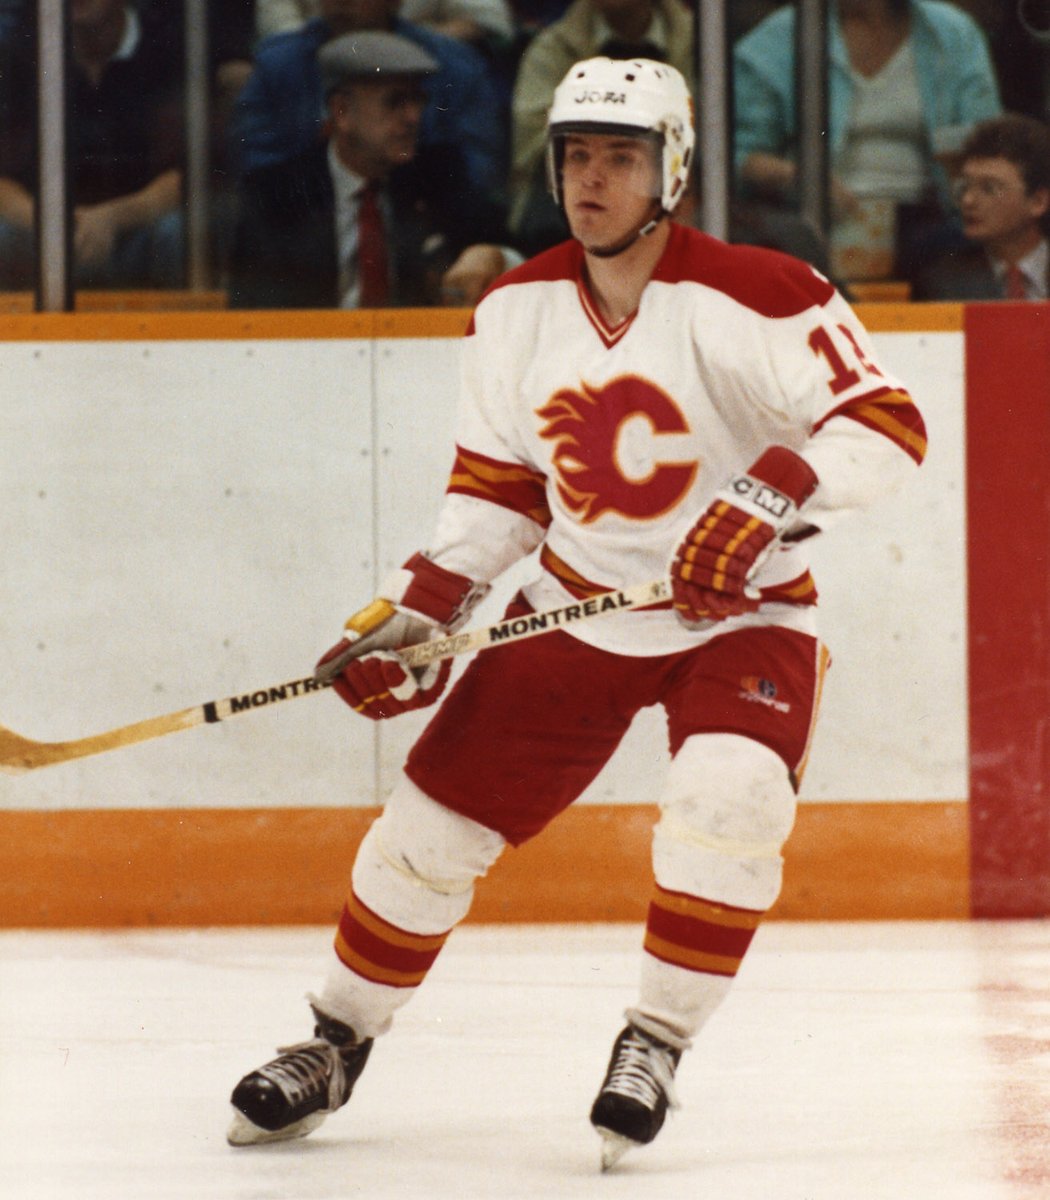 35 years ago today, @HkanLoob became the first Swedish player to hit 50 goals in a single season in the #NHL! In a 4-1 win over the Minnesota North Stars at the 'Dome, Loob hit the milestone when he scored a power play goal in the third period!